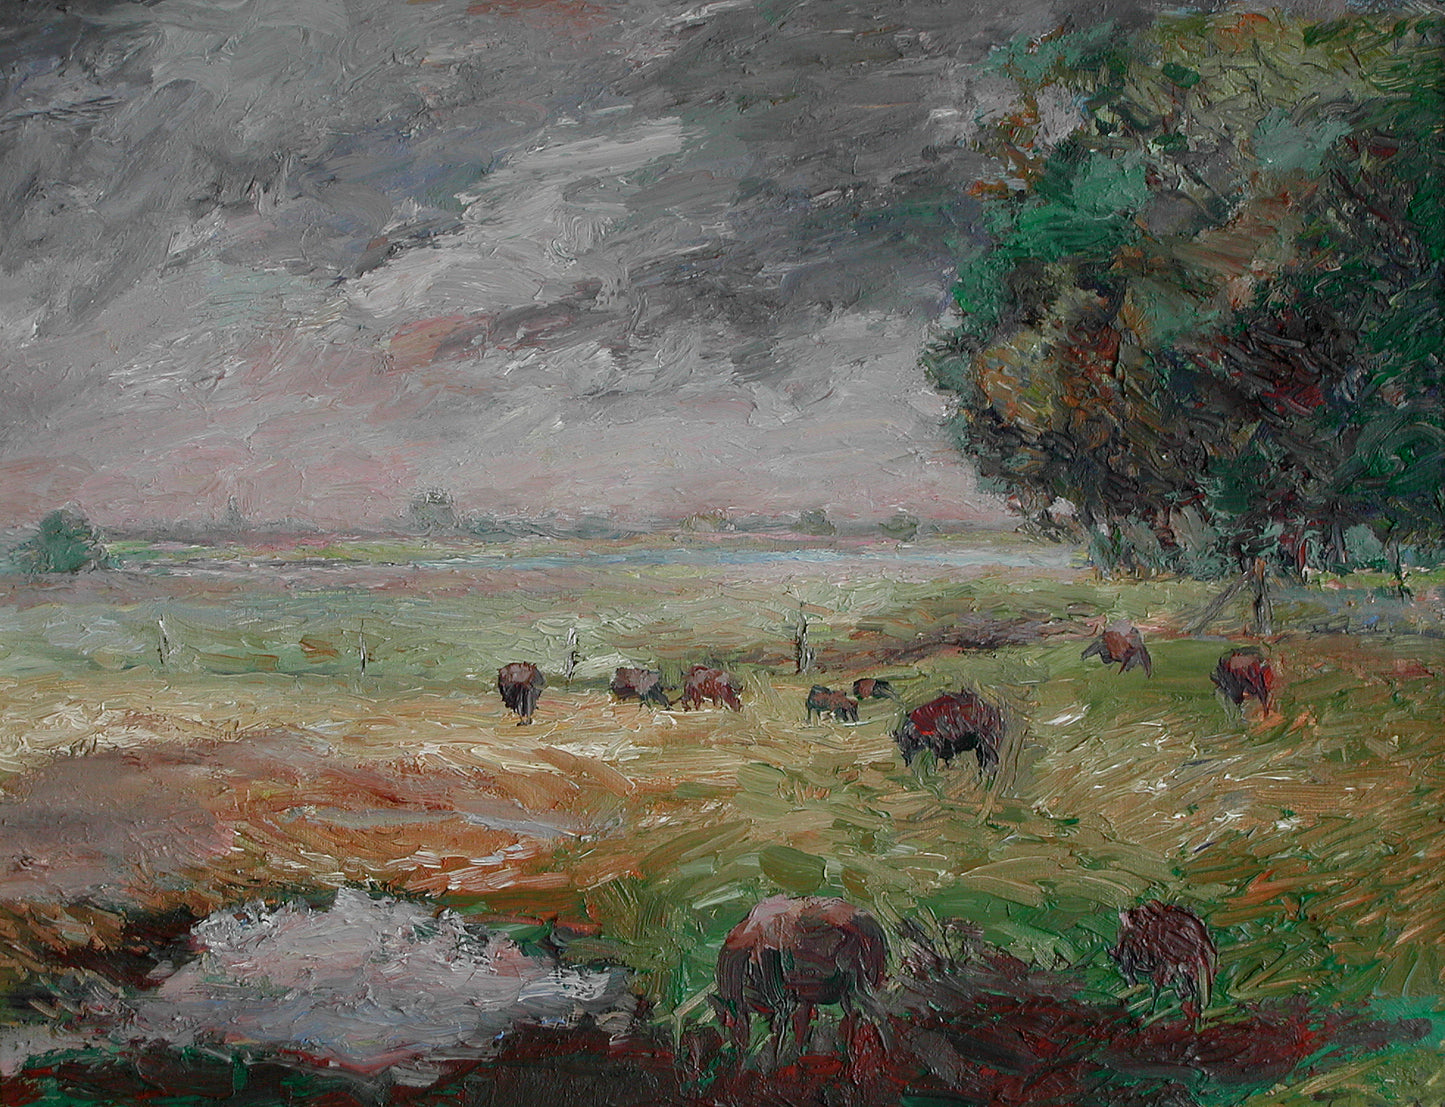 ‘Landscape with sheep’ 2003 oil on linen 40x50cm